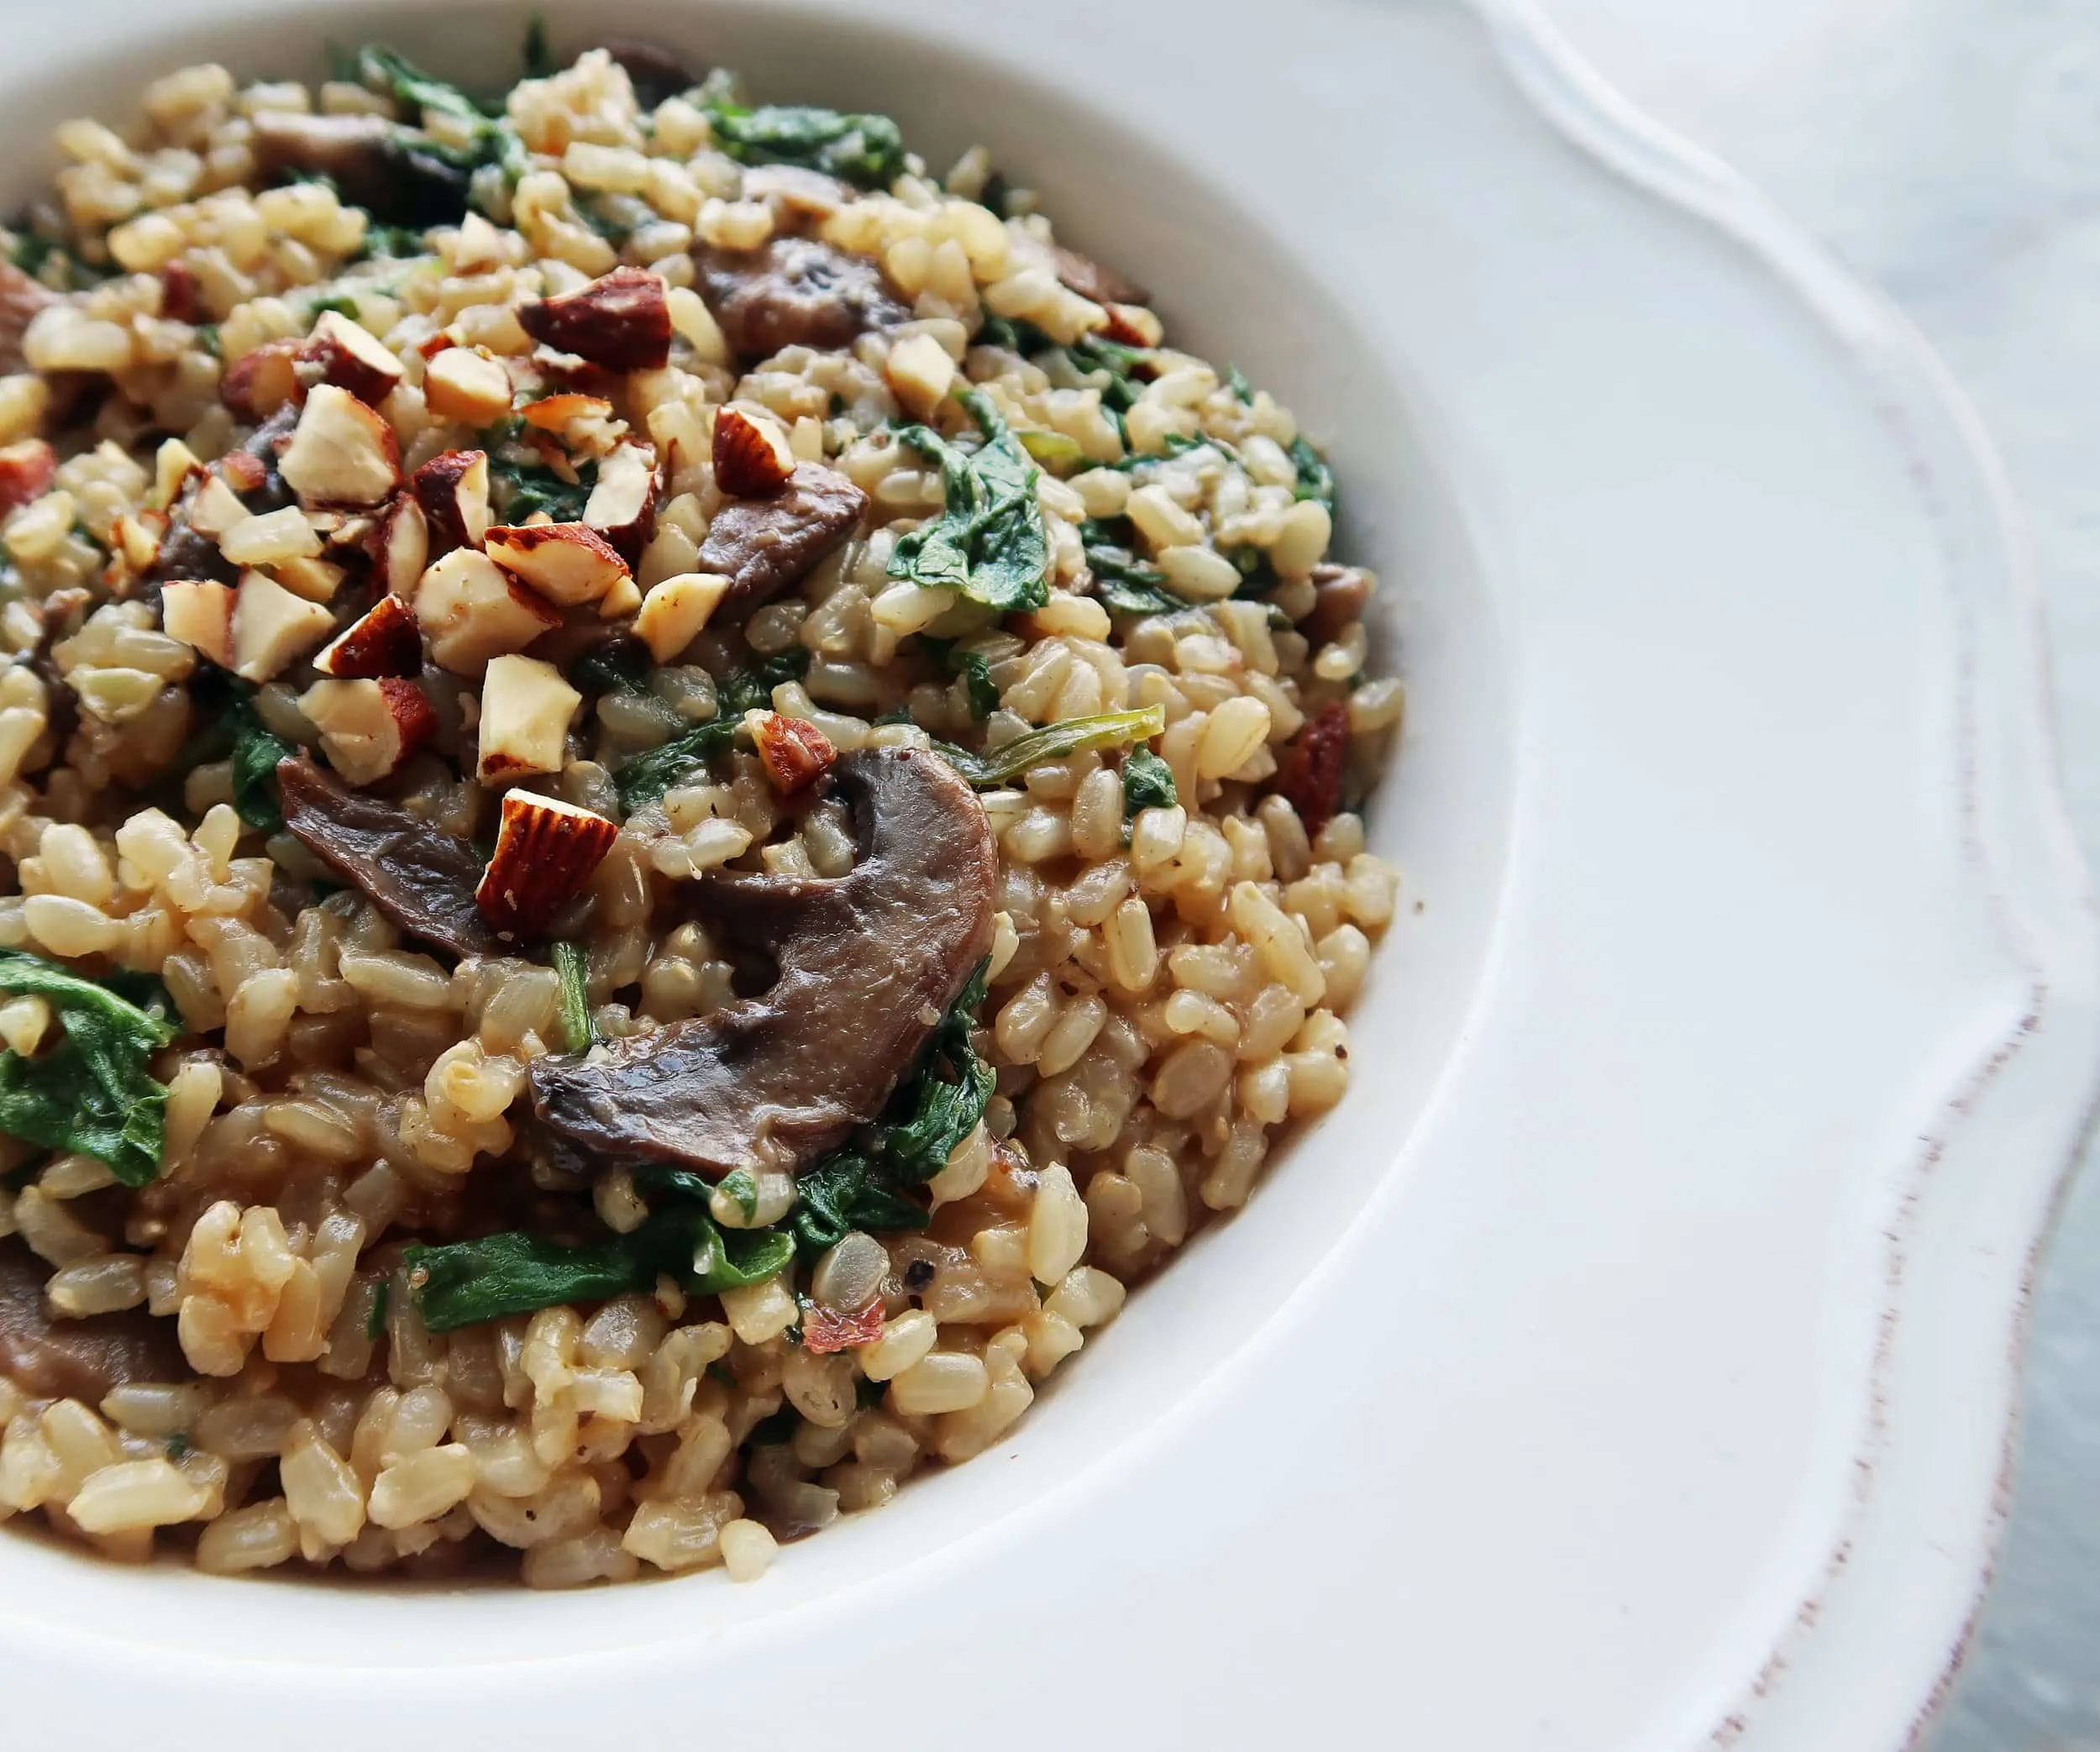 A close up of a bowl of Brown Rice Pilaf with Mushrooms, Kale, and Almonds